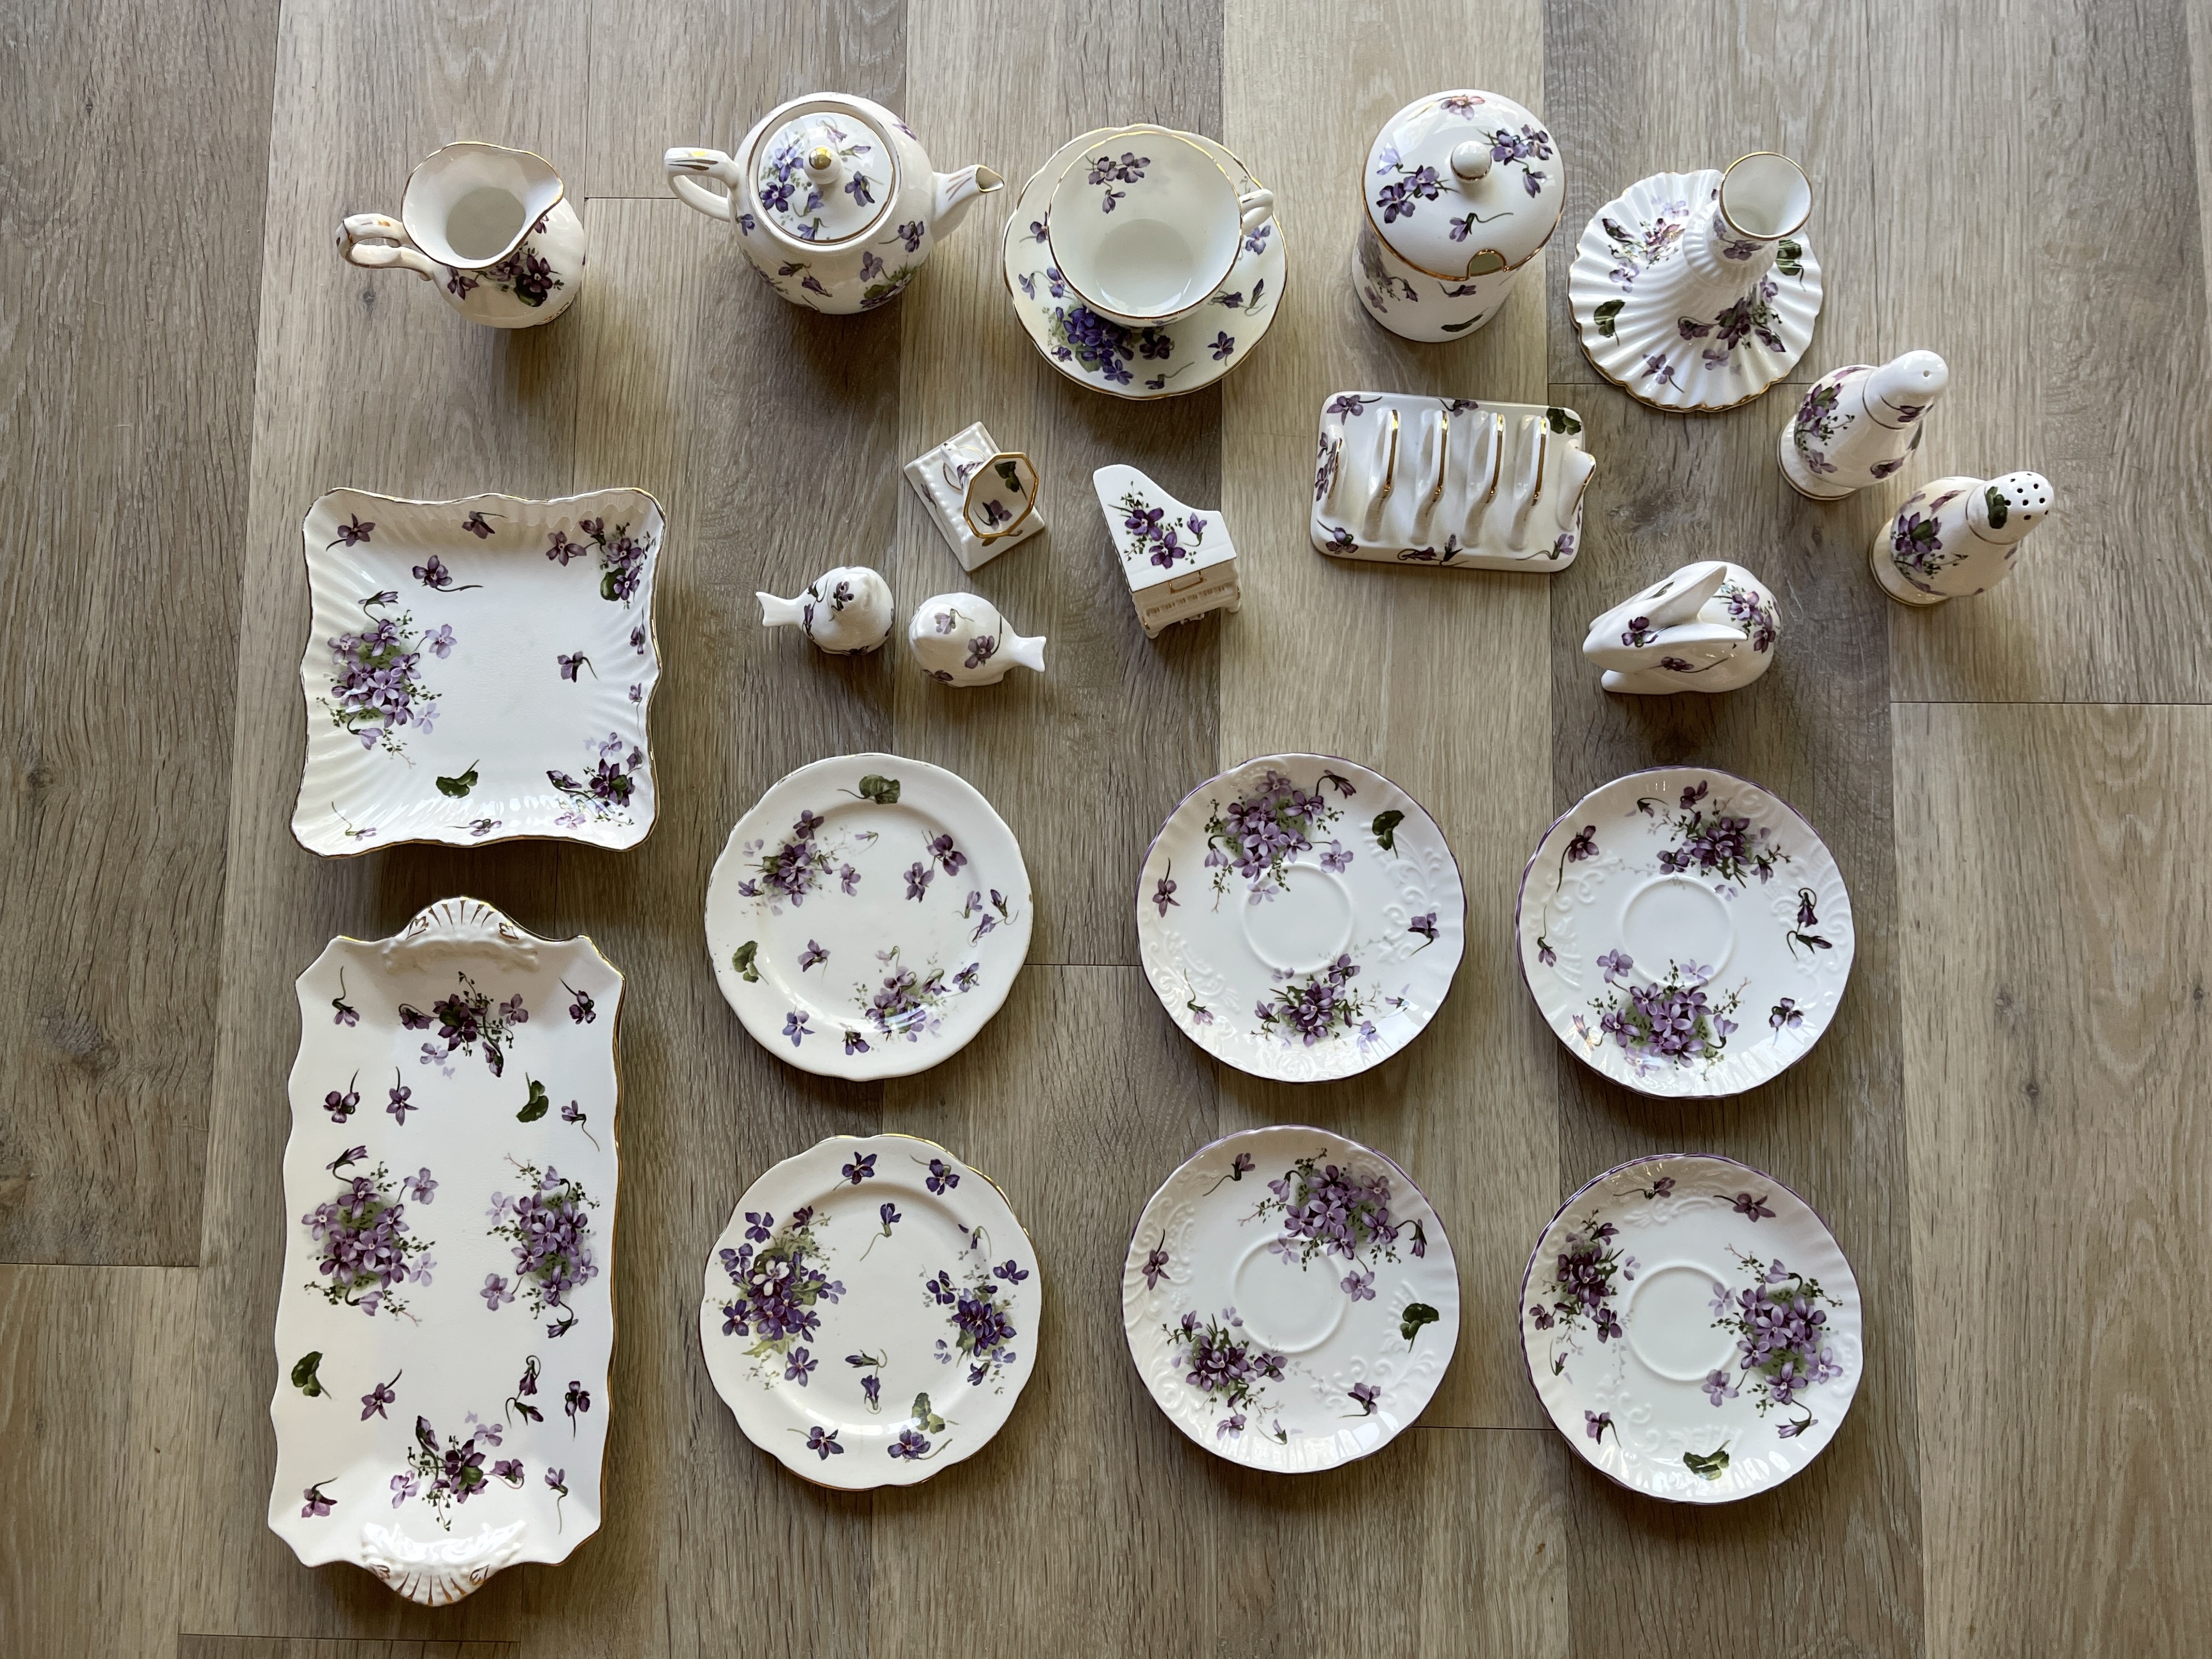 Collection of Hamersley Fine Bone China, 22 Pieces - Image 14 of 17